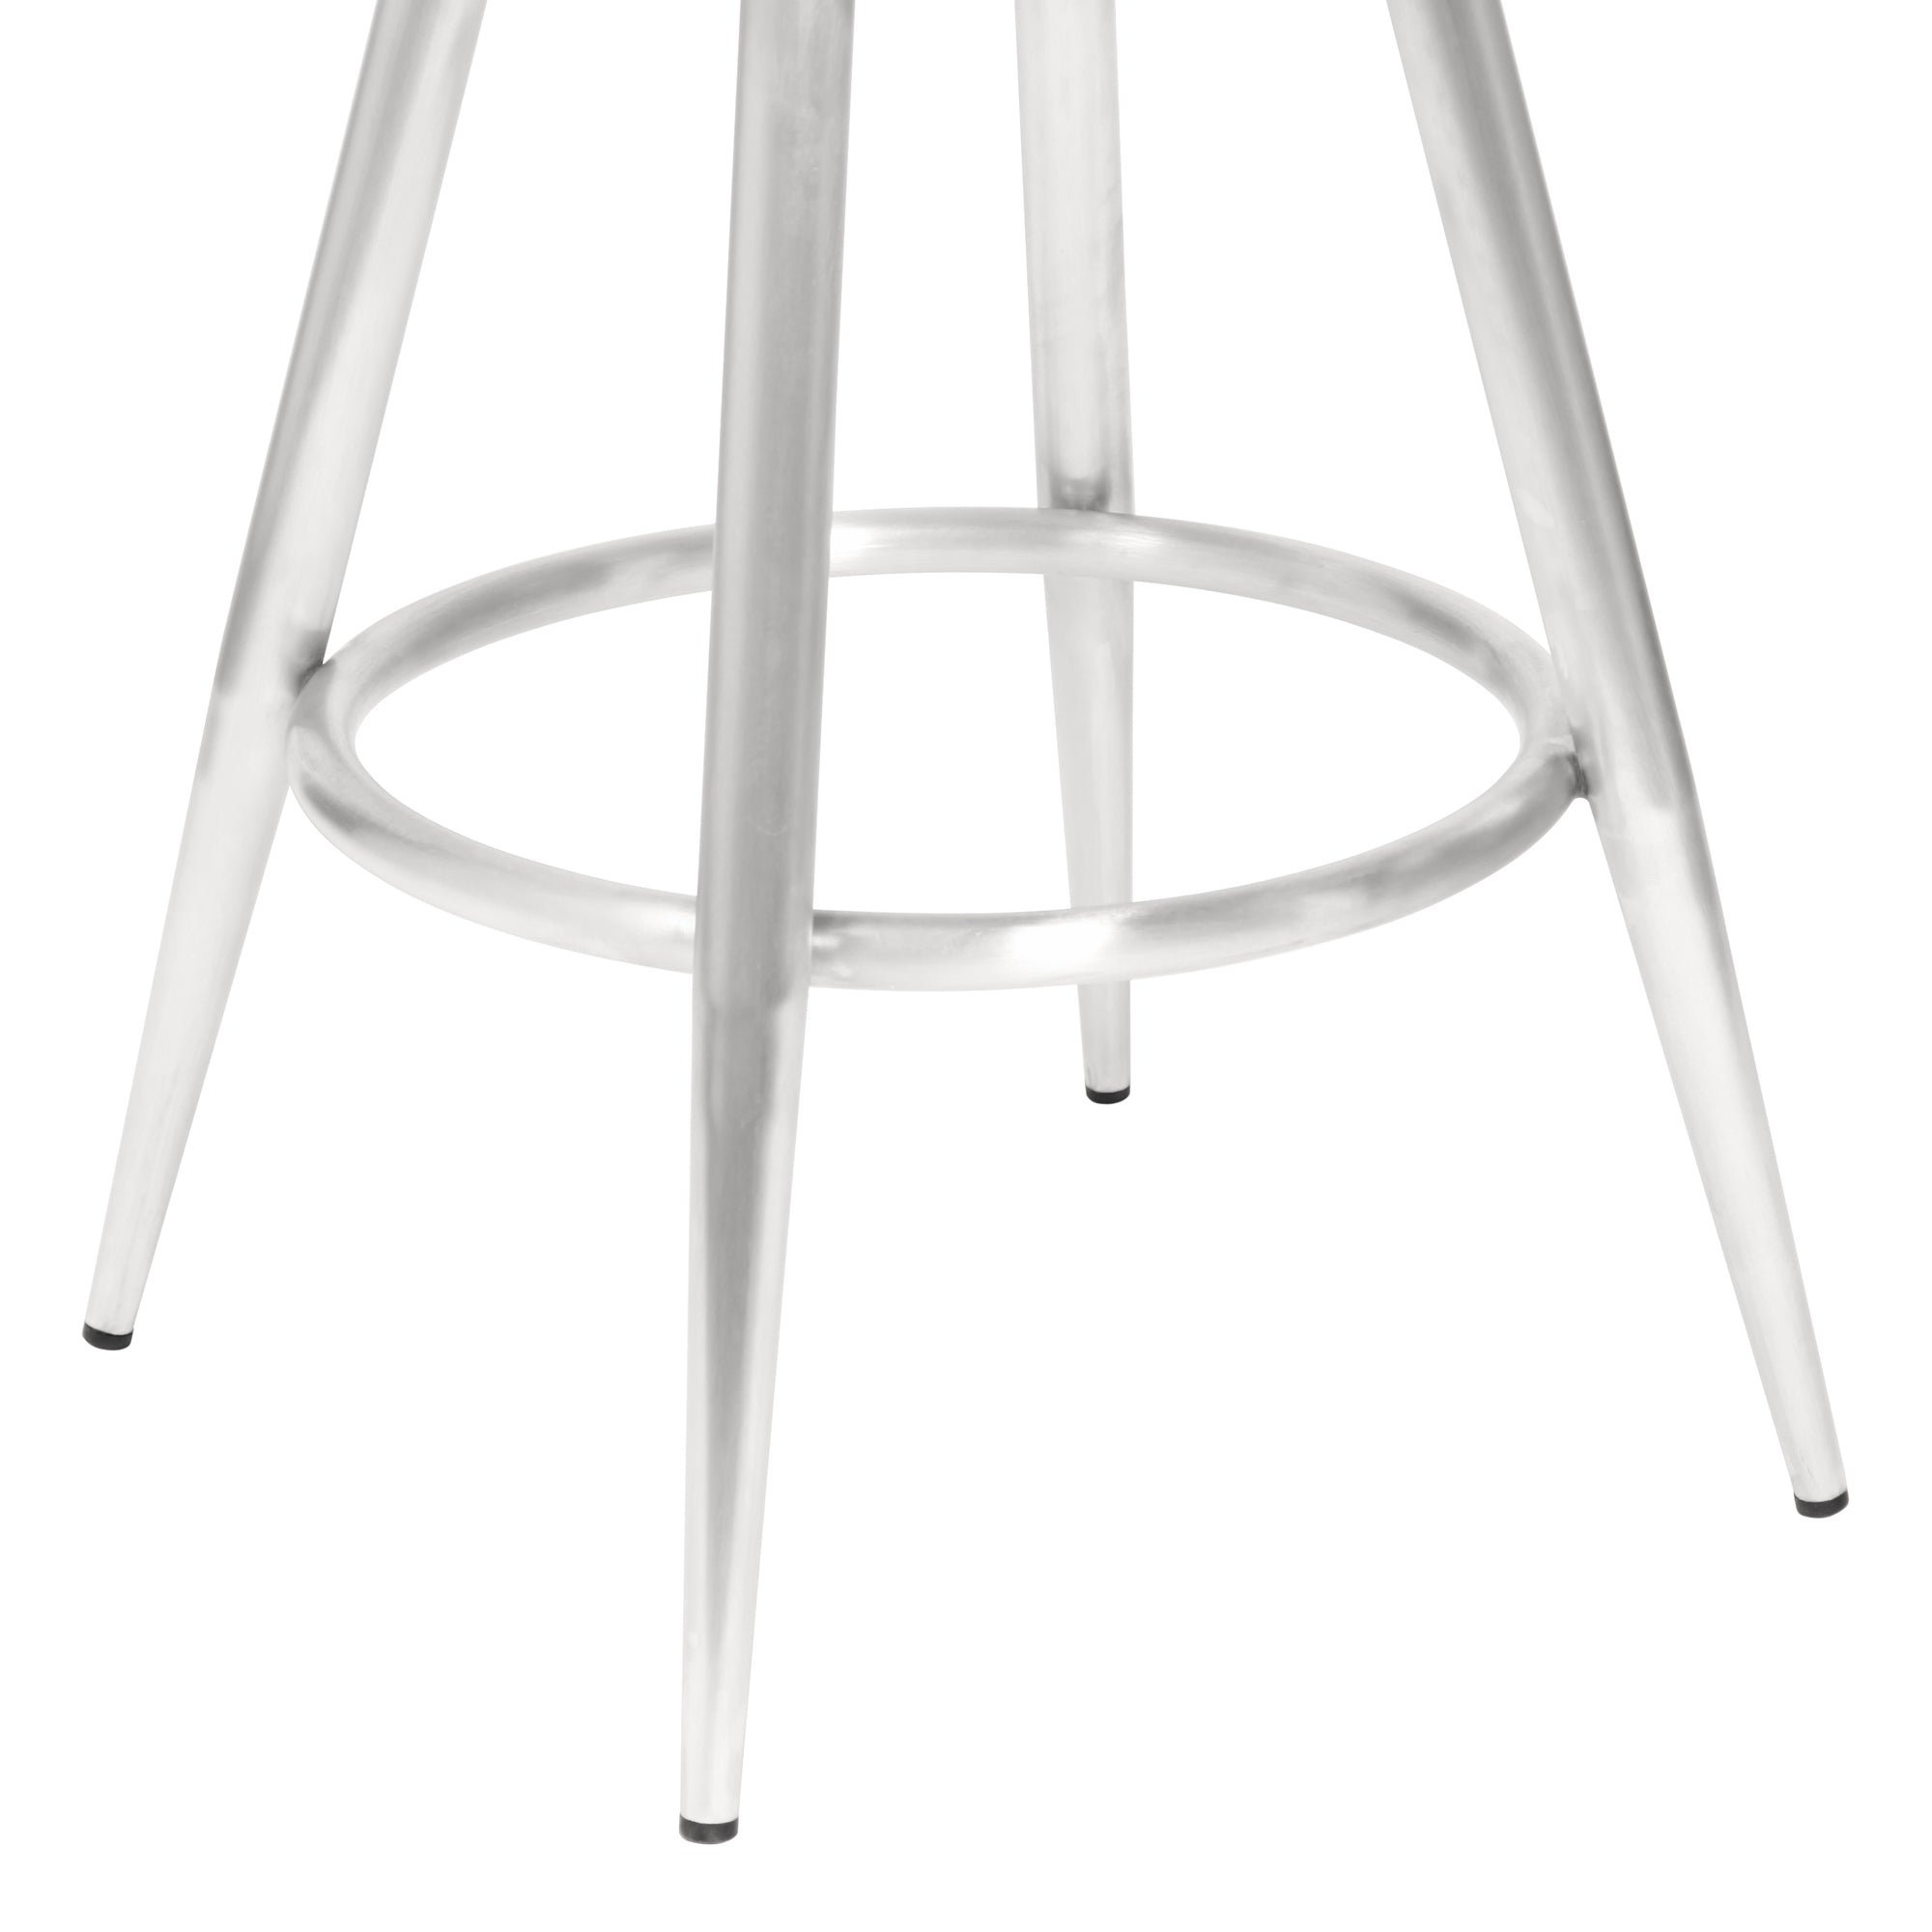 Justin Counter Stool or Barstool in Brushed Stainless Steel and Vintage Black Faux Leather